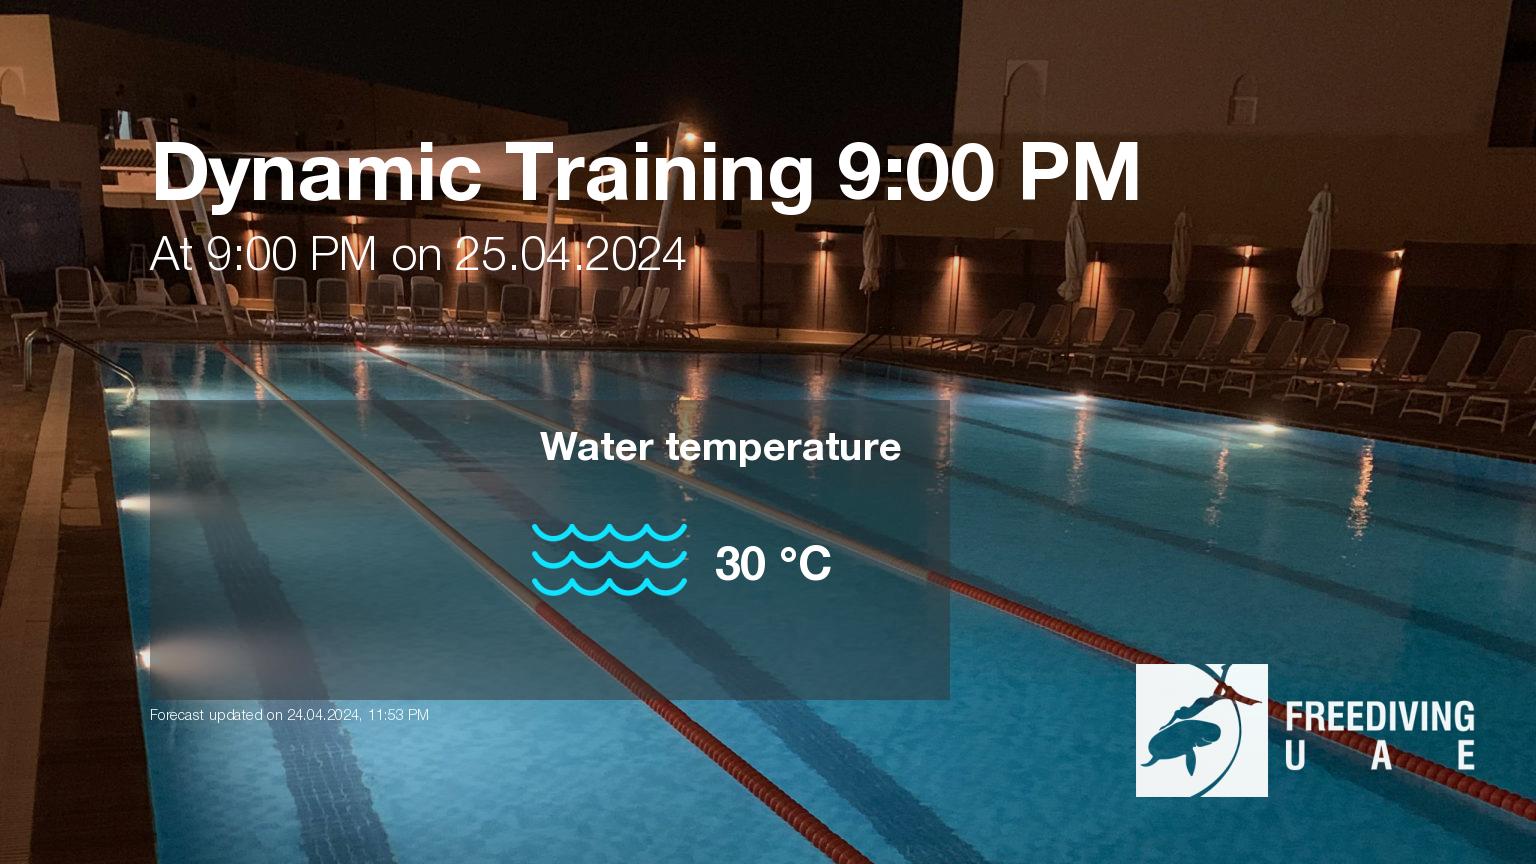 Expected weather during Dynamic Training 9:00 PM on Thu, Apr 25, at 9:00 PM